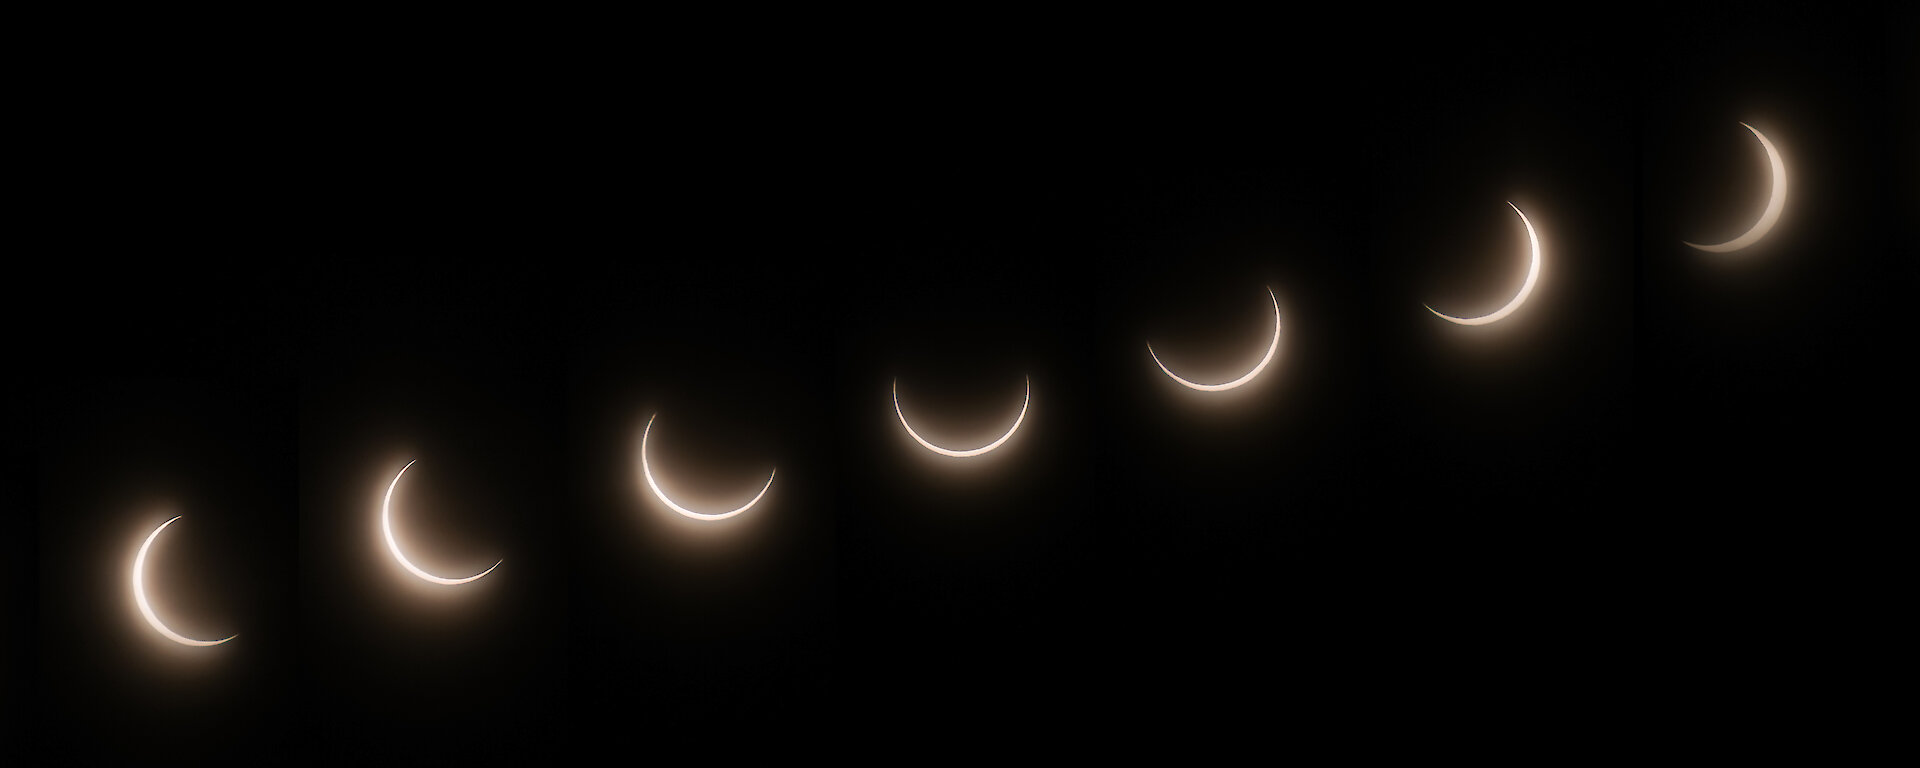 Timelapse of the eclipse as viewed from Casey station